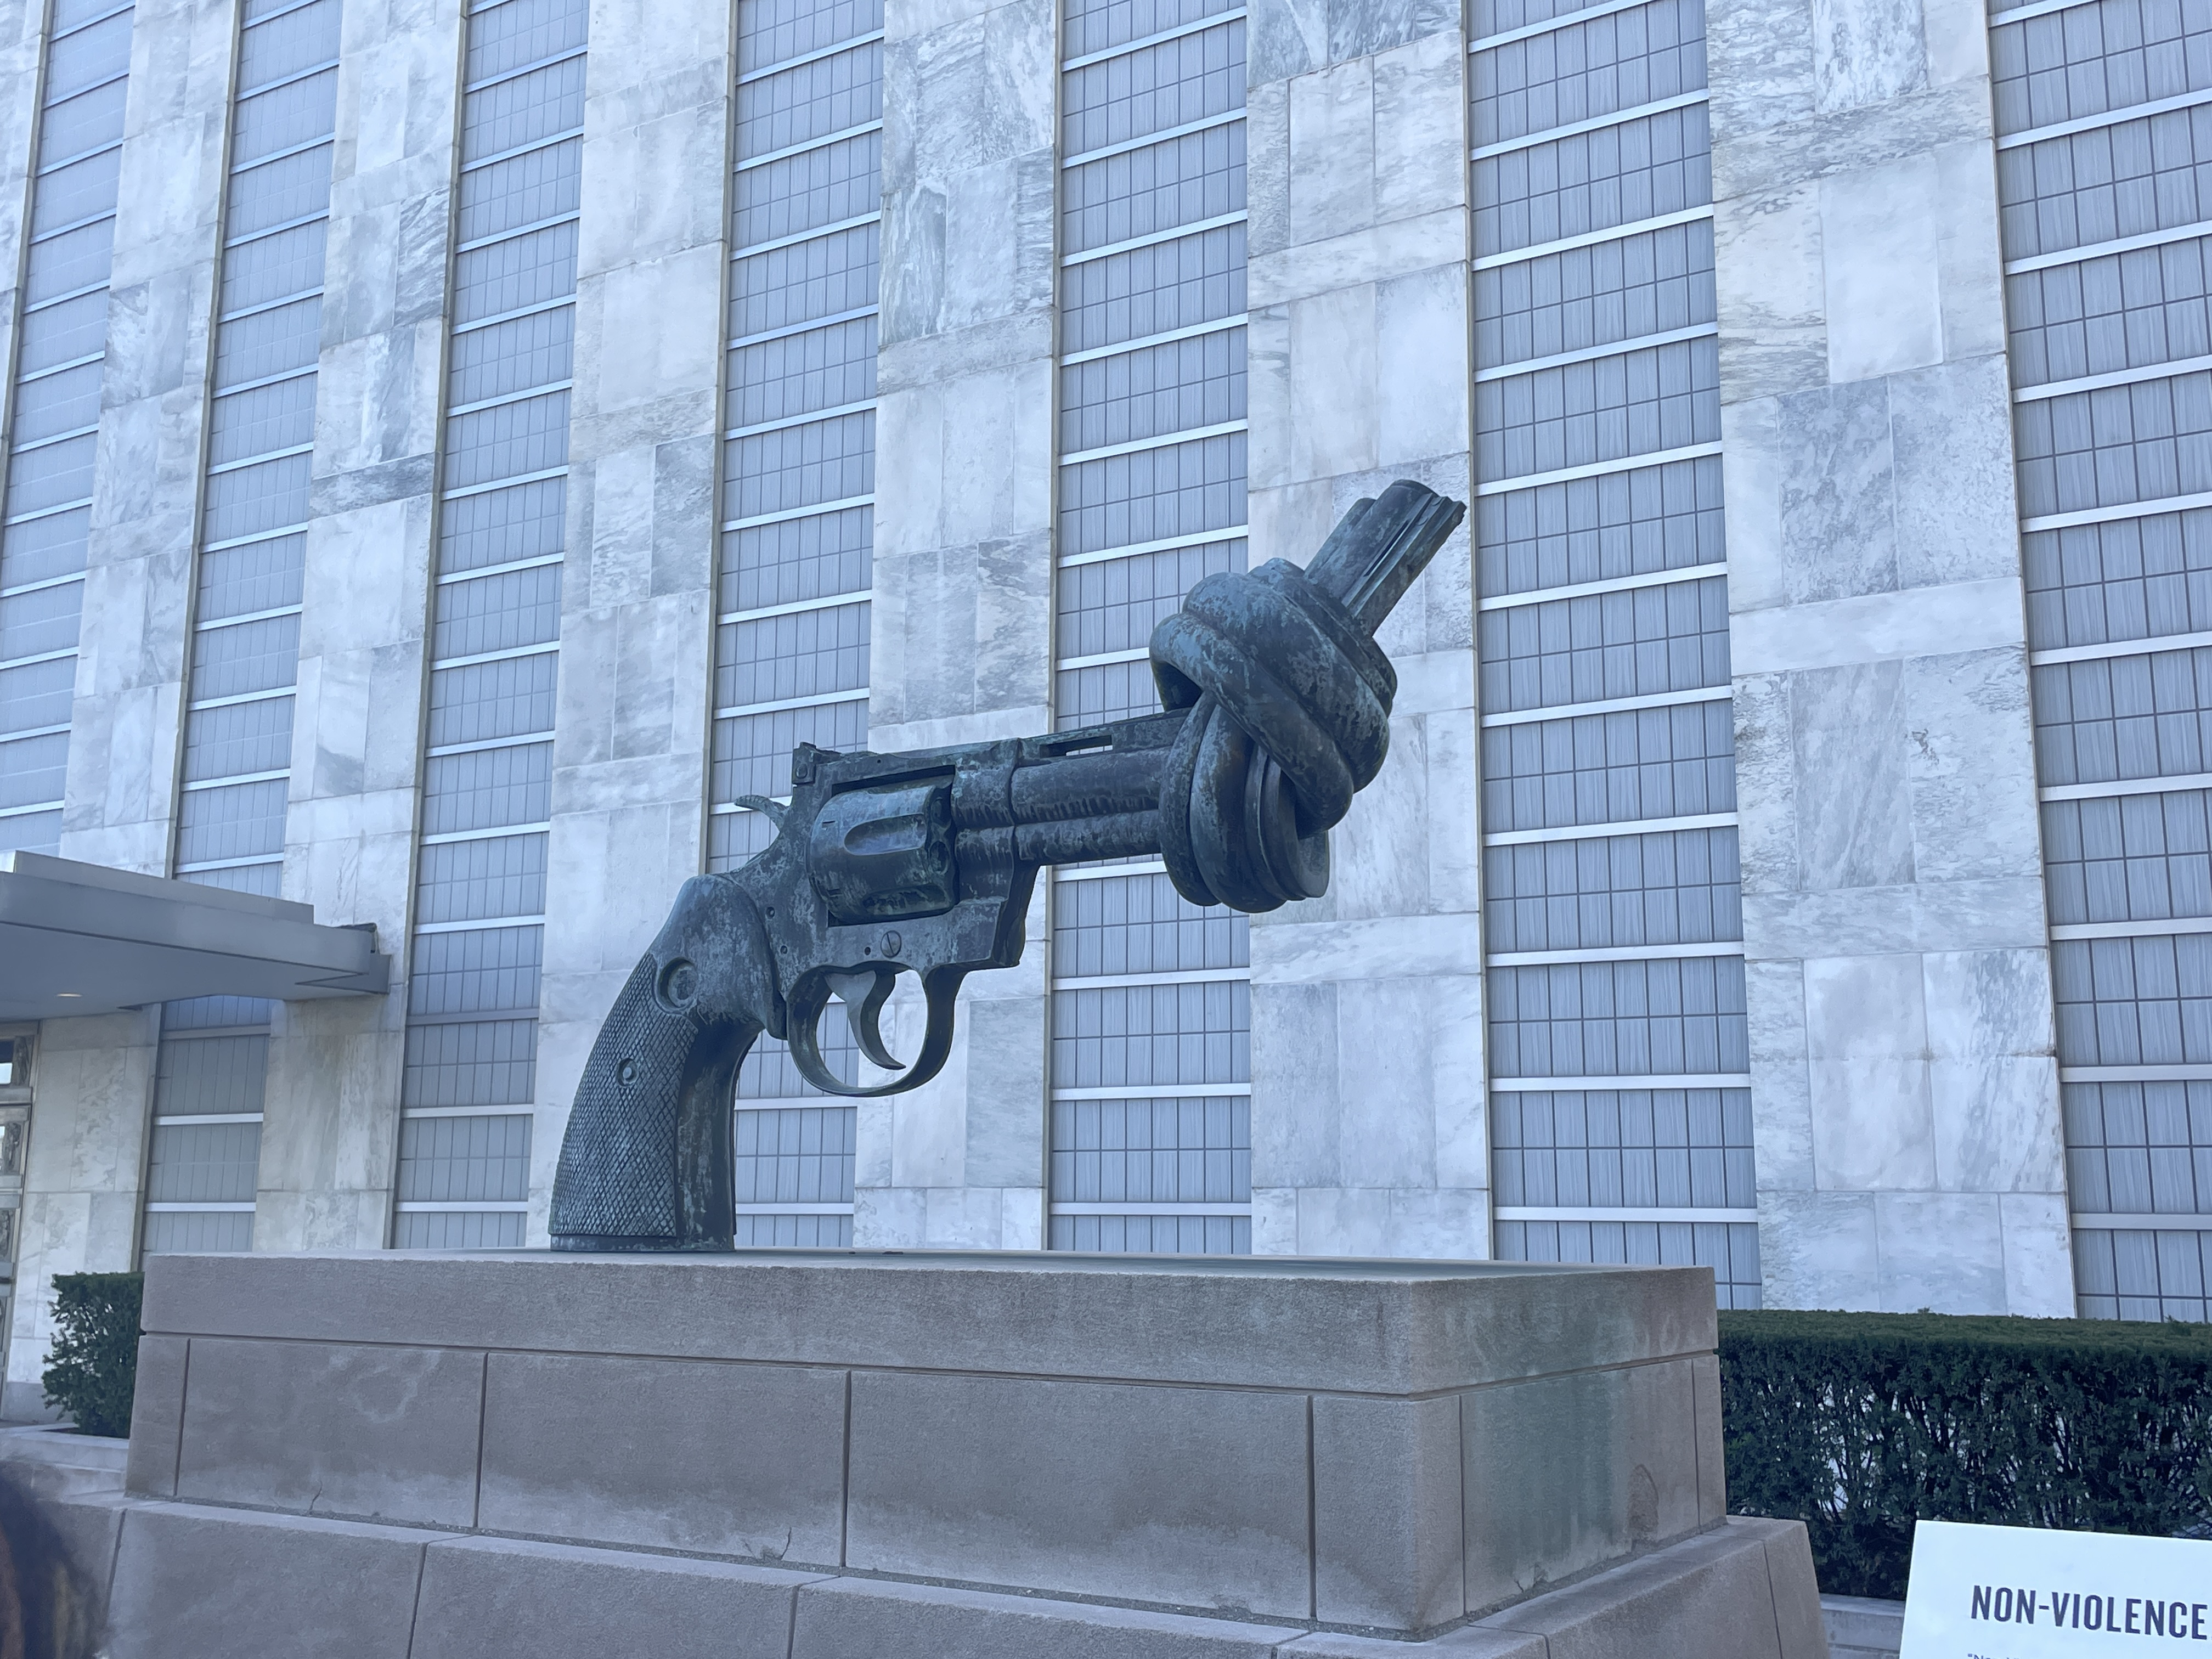 Picture of the UN Non-violence sculpture by Carl Fredrik, which is a gun whose barrel is tied in a knot.